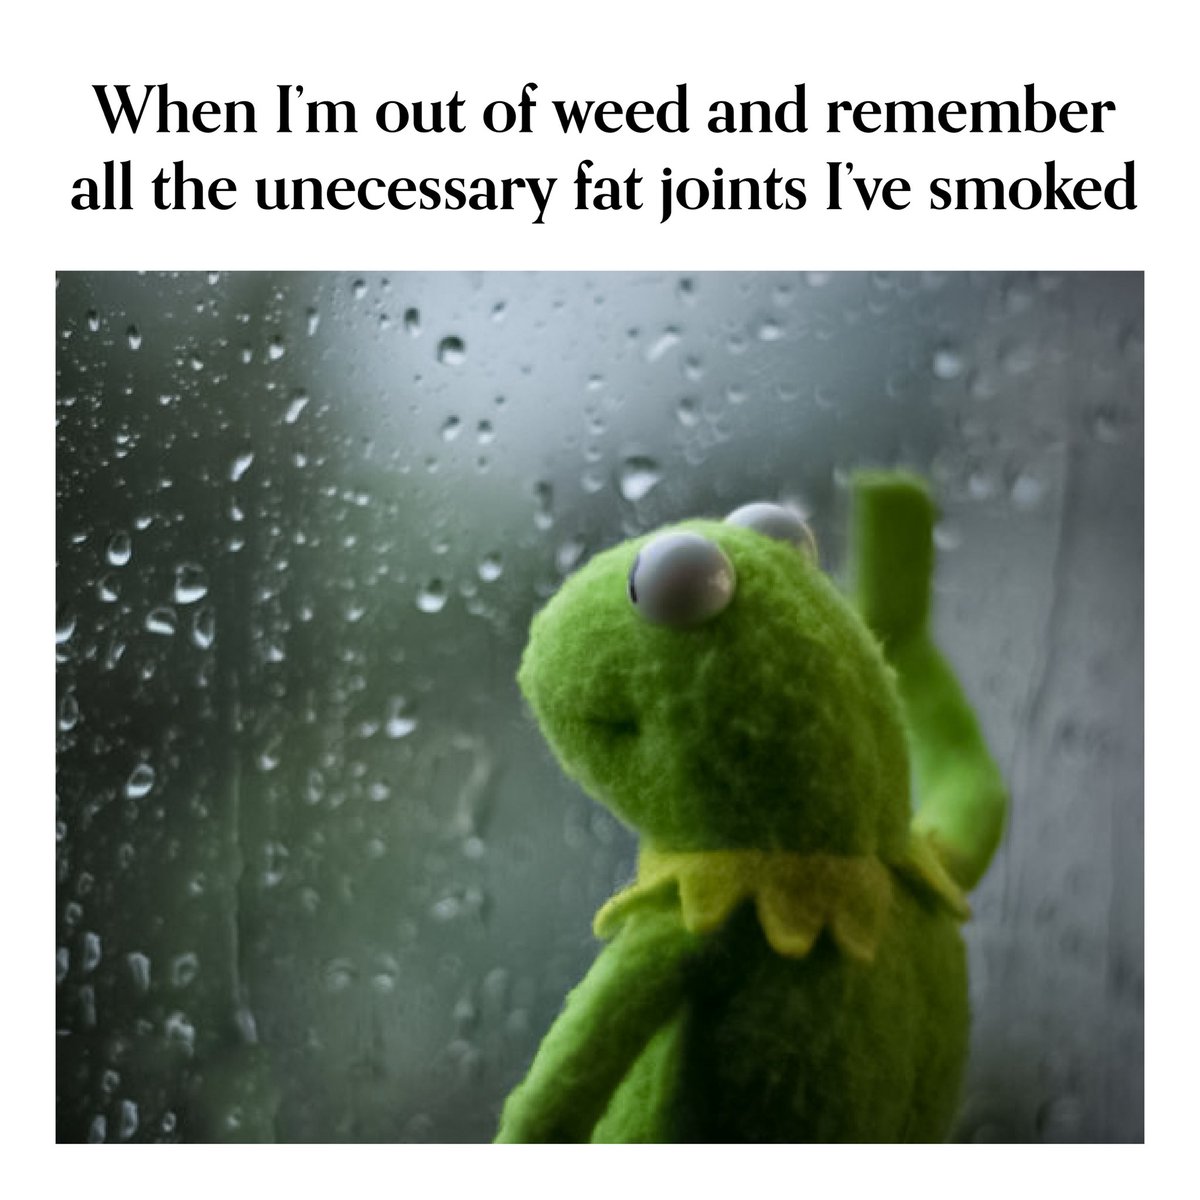 Should have known better🥲
#weedmeme #weedsmokers